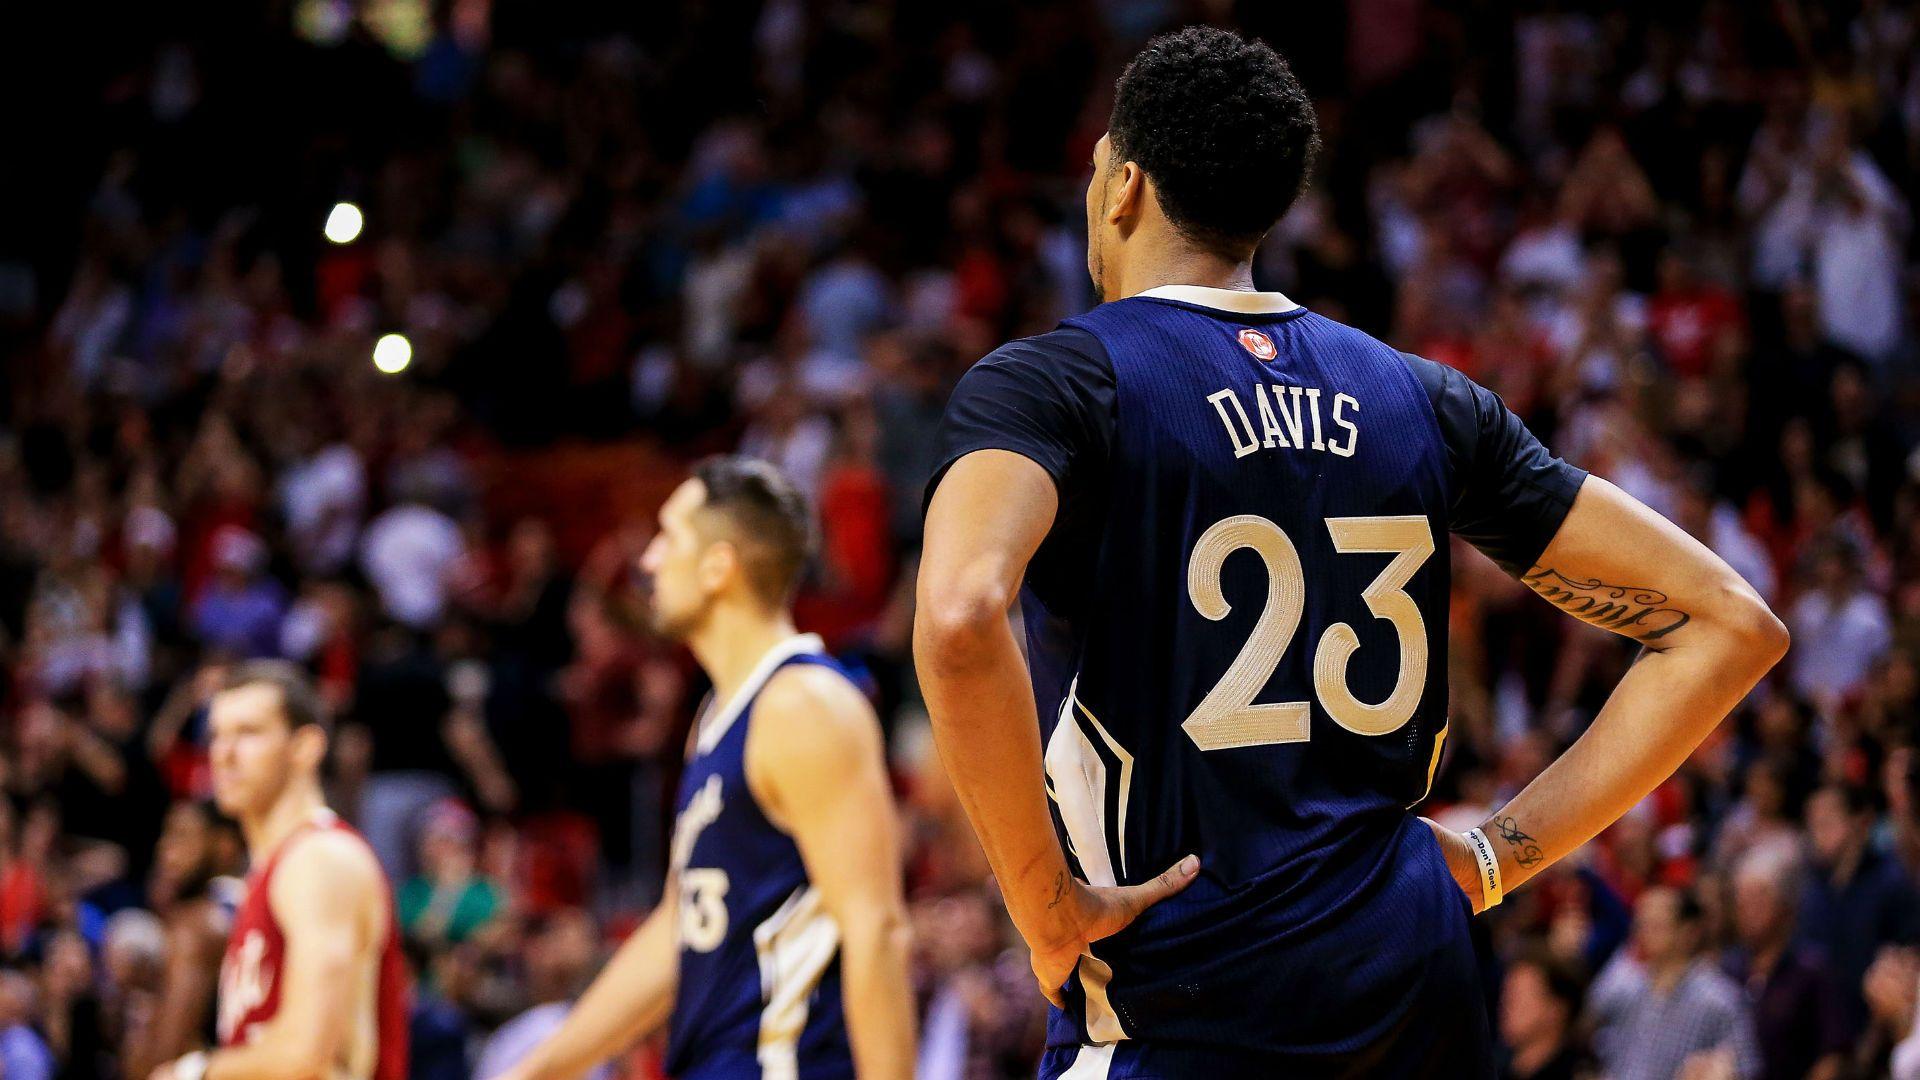 Anthony Davis is the NBA's best power forward, and the Pelicans